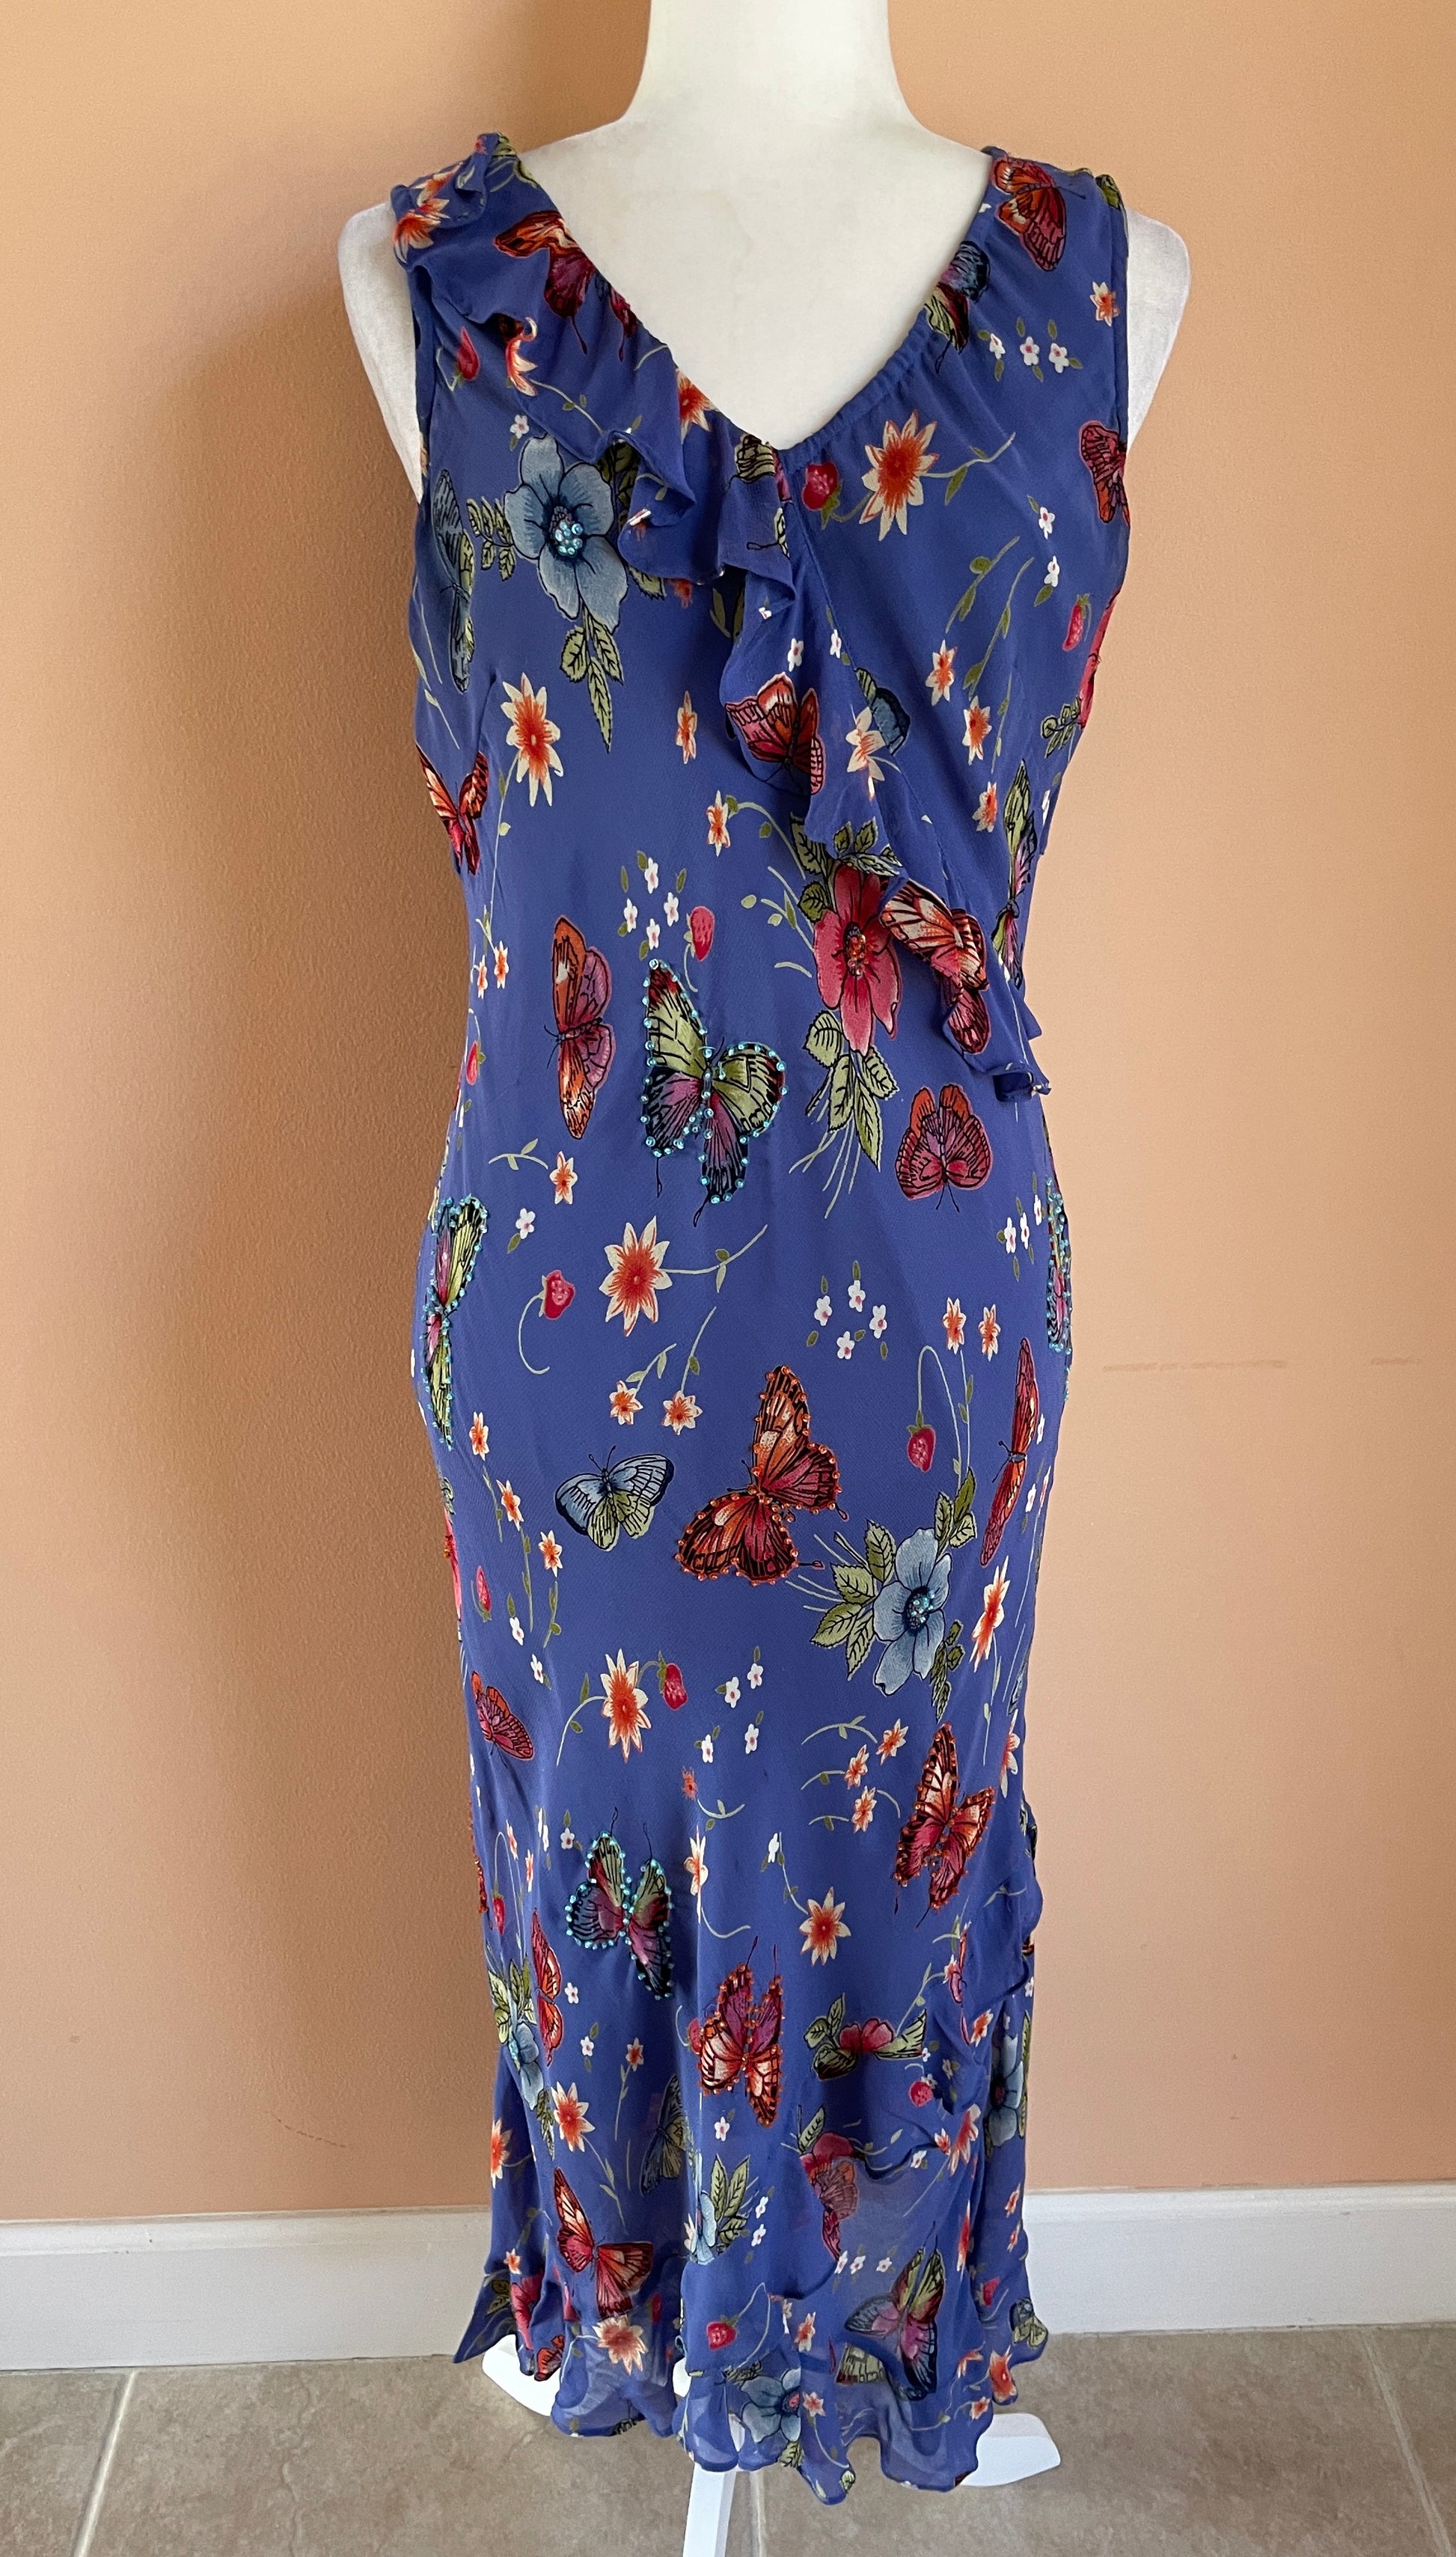 Vintage 90s Butterfly print dress Vintage 90s Lola P Blue Beaded Butterfly Floral Print Summer Garden Party Silk Rayon Blend Ruffle Sleeveless Long Draped Bodycon Dress M